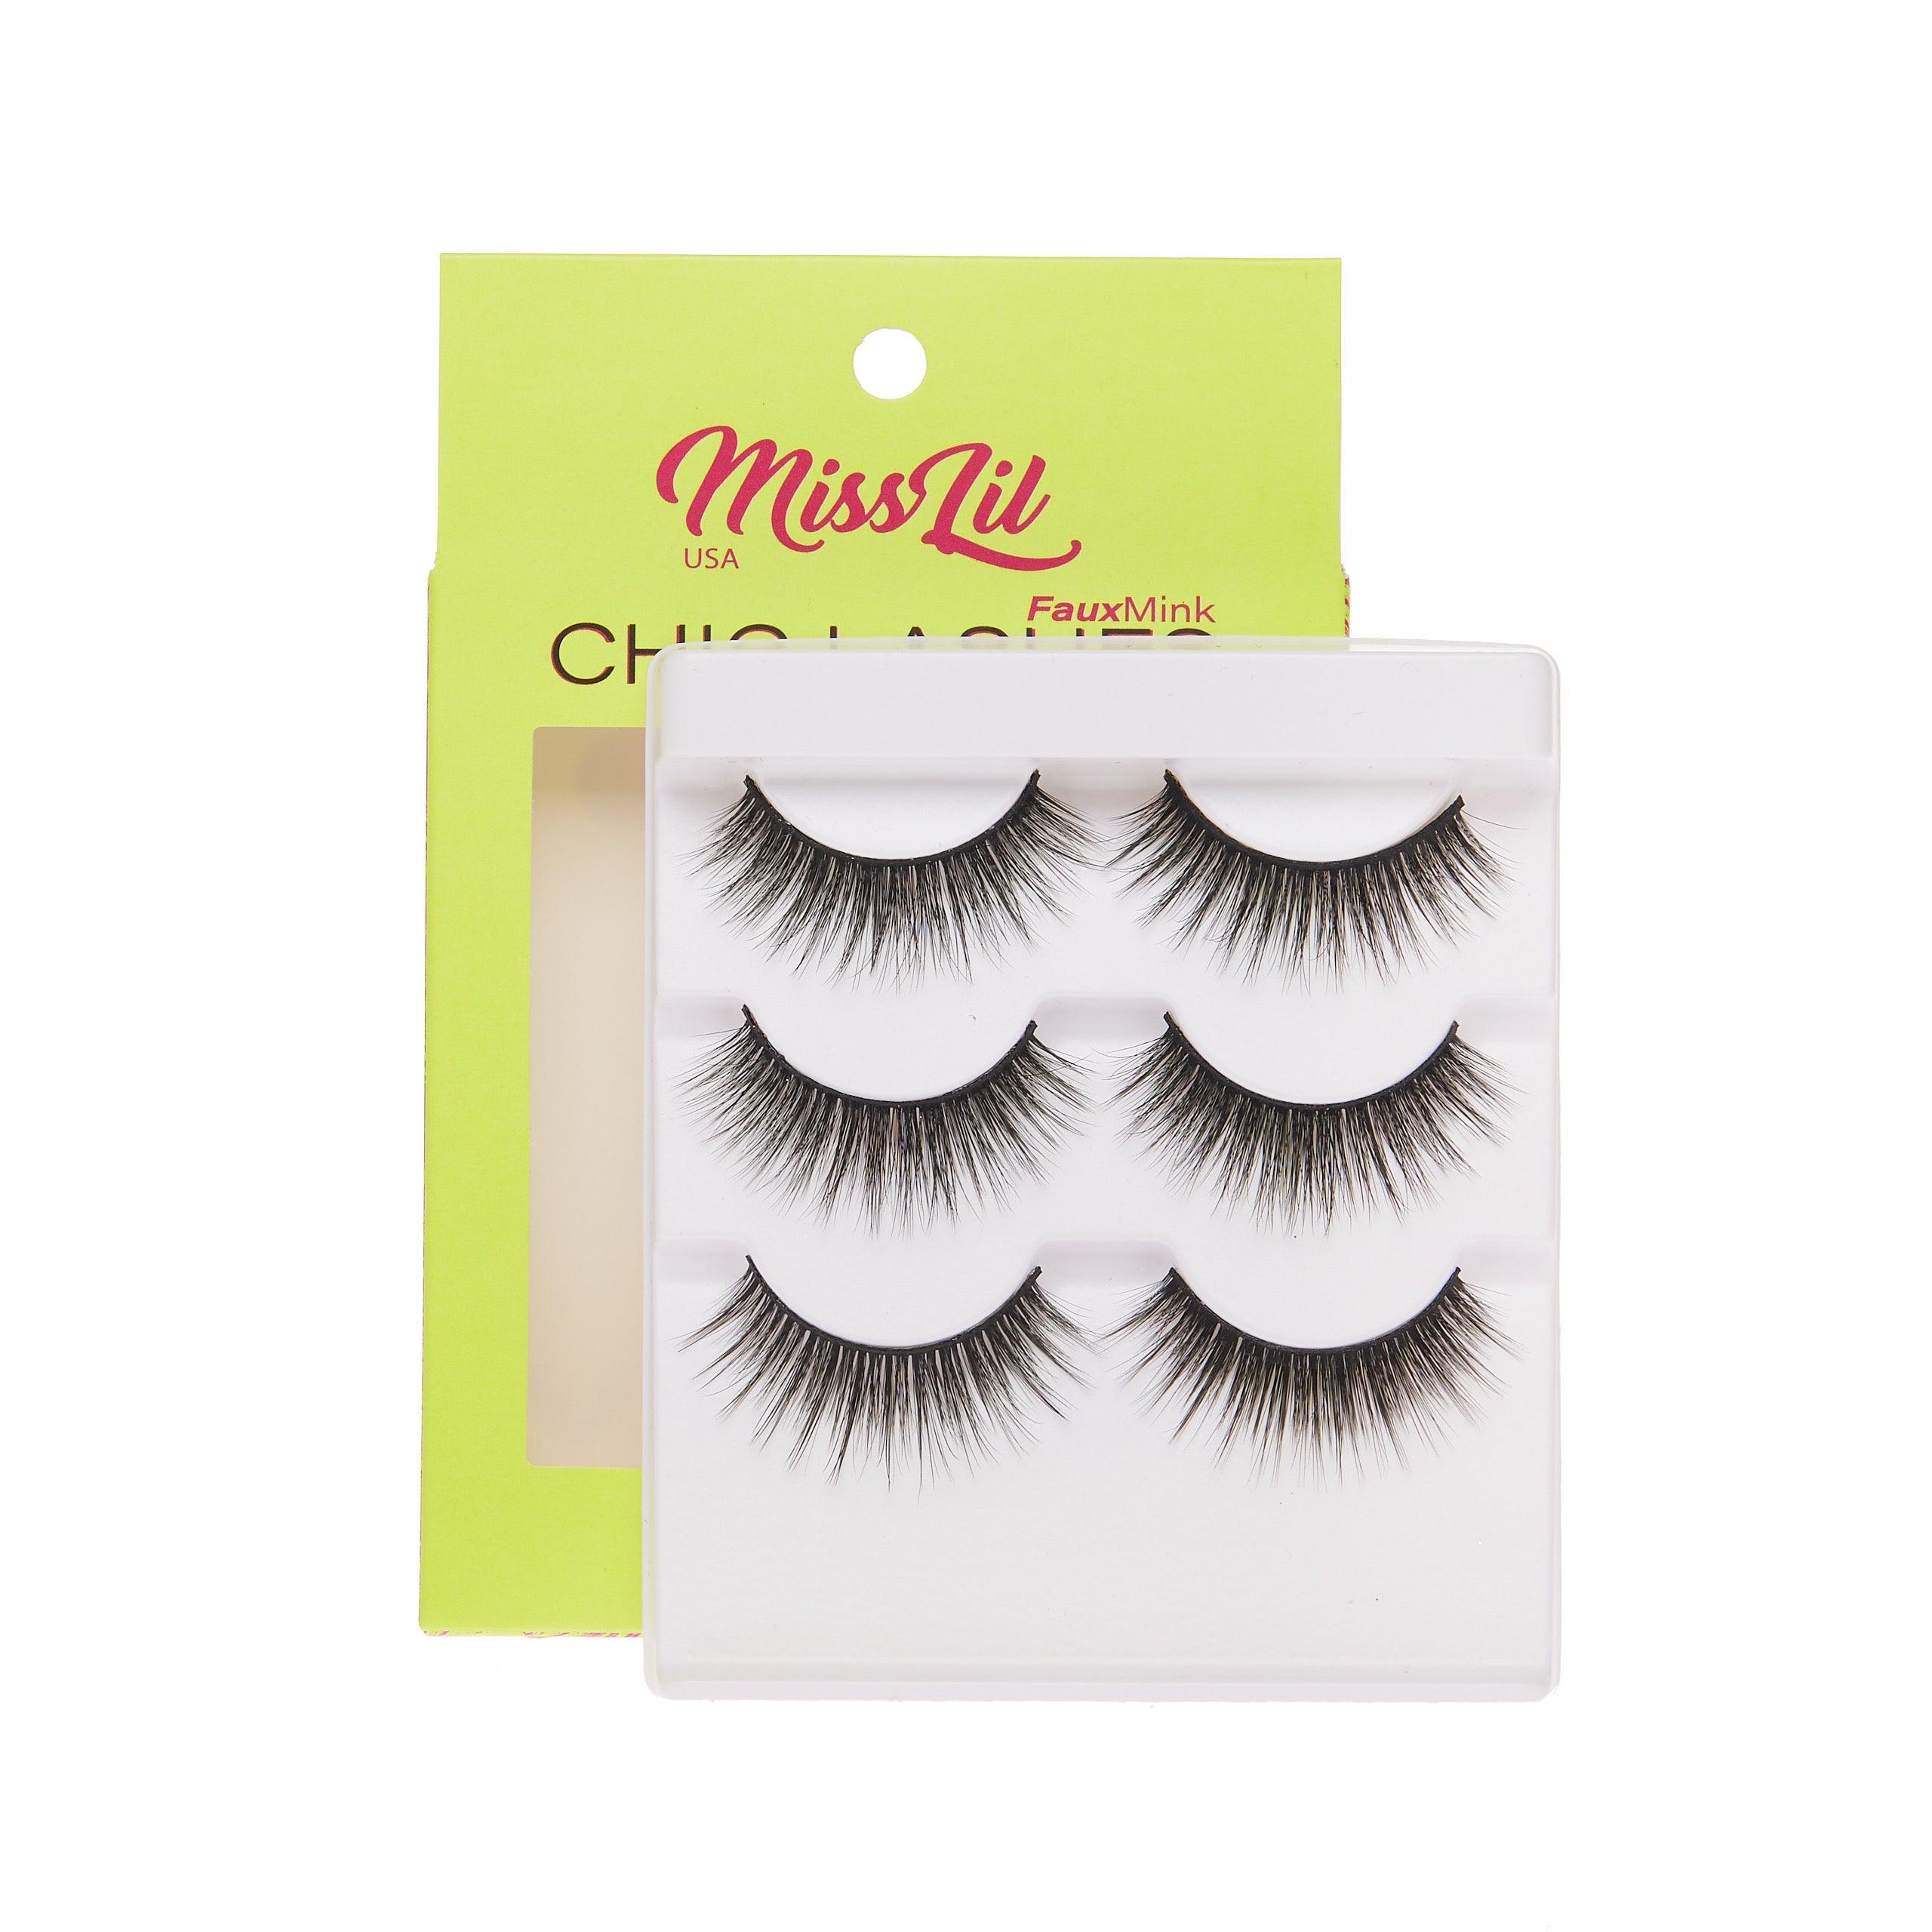 3-Pair Faux Mink Eyelashes - Chic Lashes Collection #31 - Pack of 3 - Miss Lil USA